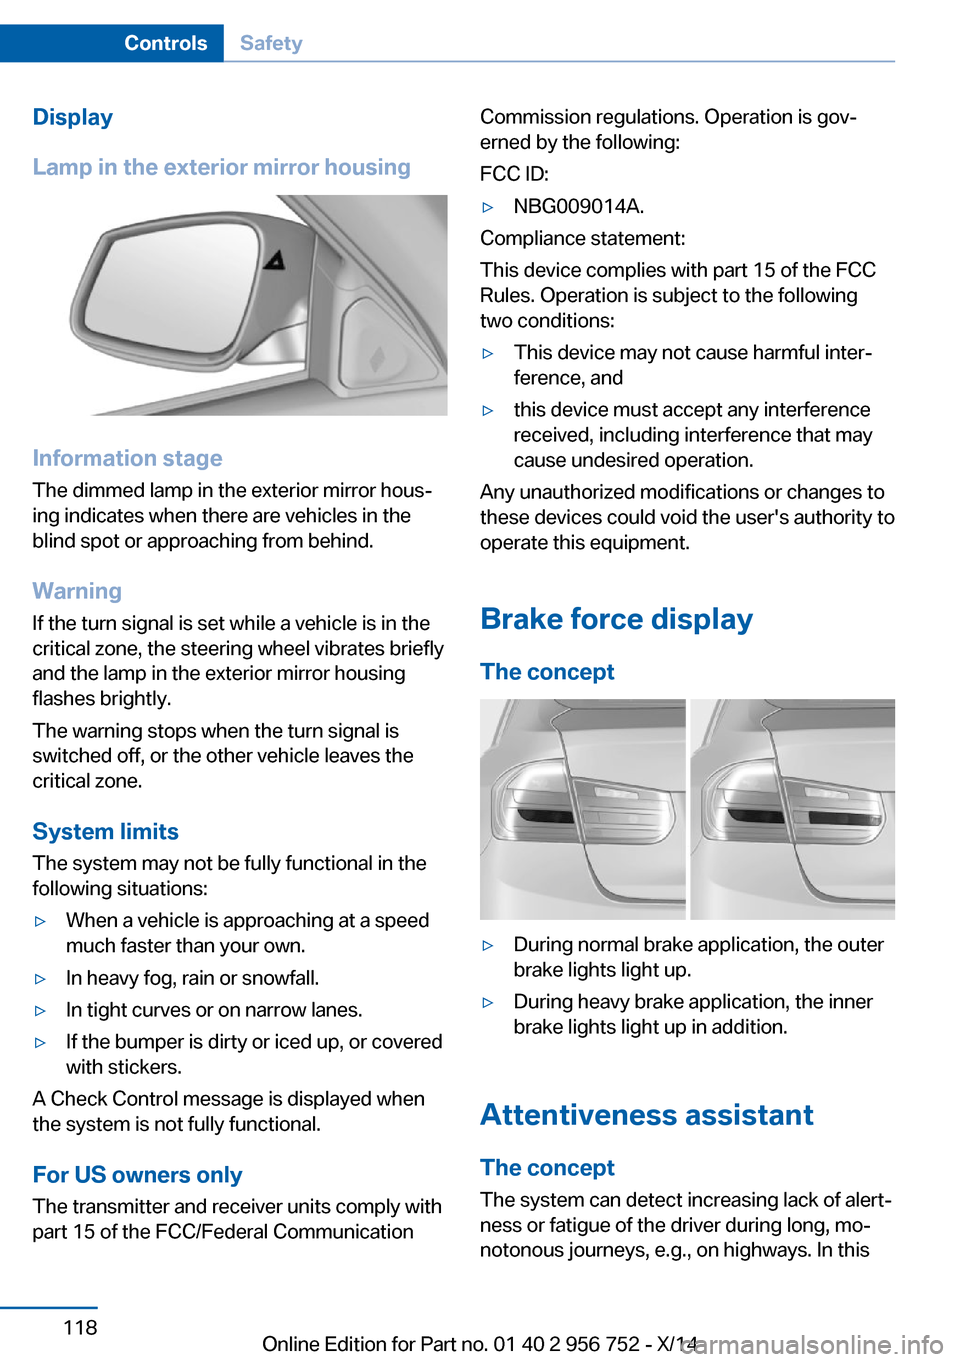 BMW 3 SERIES SPORTS WAGON 2014 F31 Owners Manual Display
Lamp in the exterior mirror housing
Information stage
The dimmed lamp in the exterior mirror hous‐
ing indicates when there are vehicles in the
blind spot or approaching from behind.
Warning